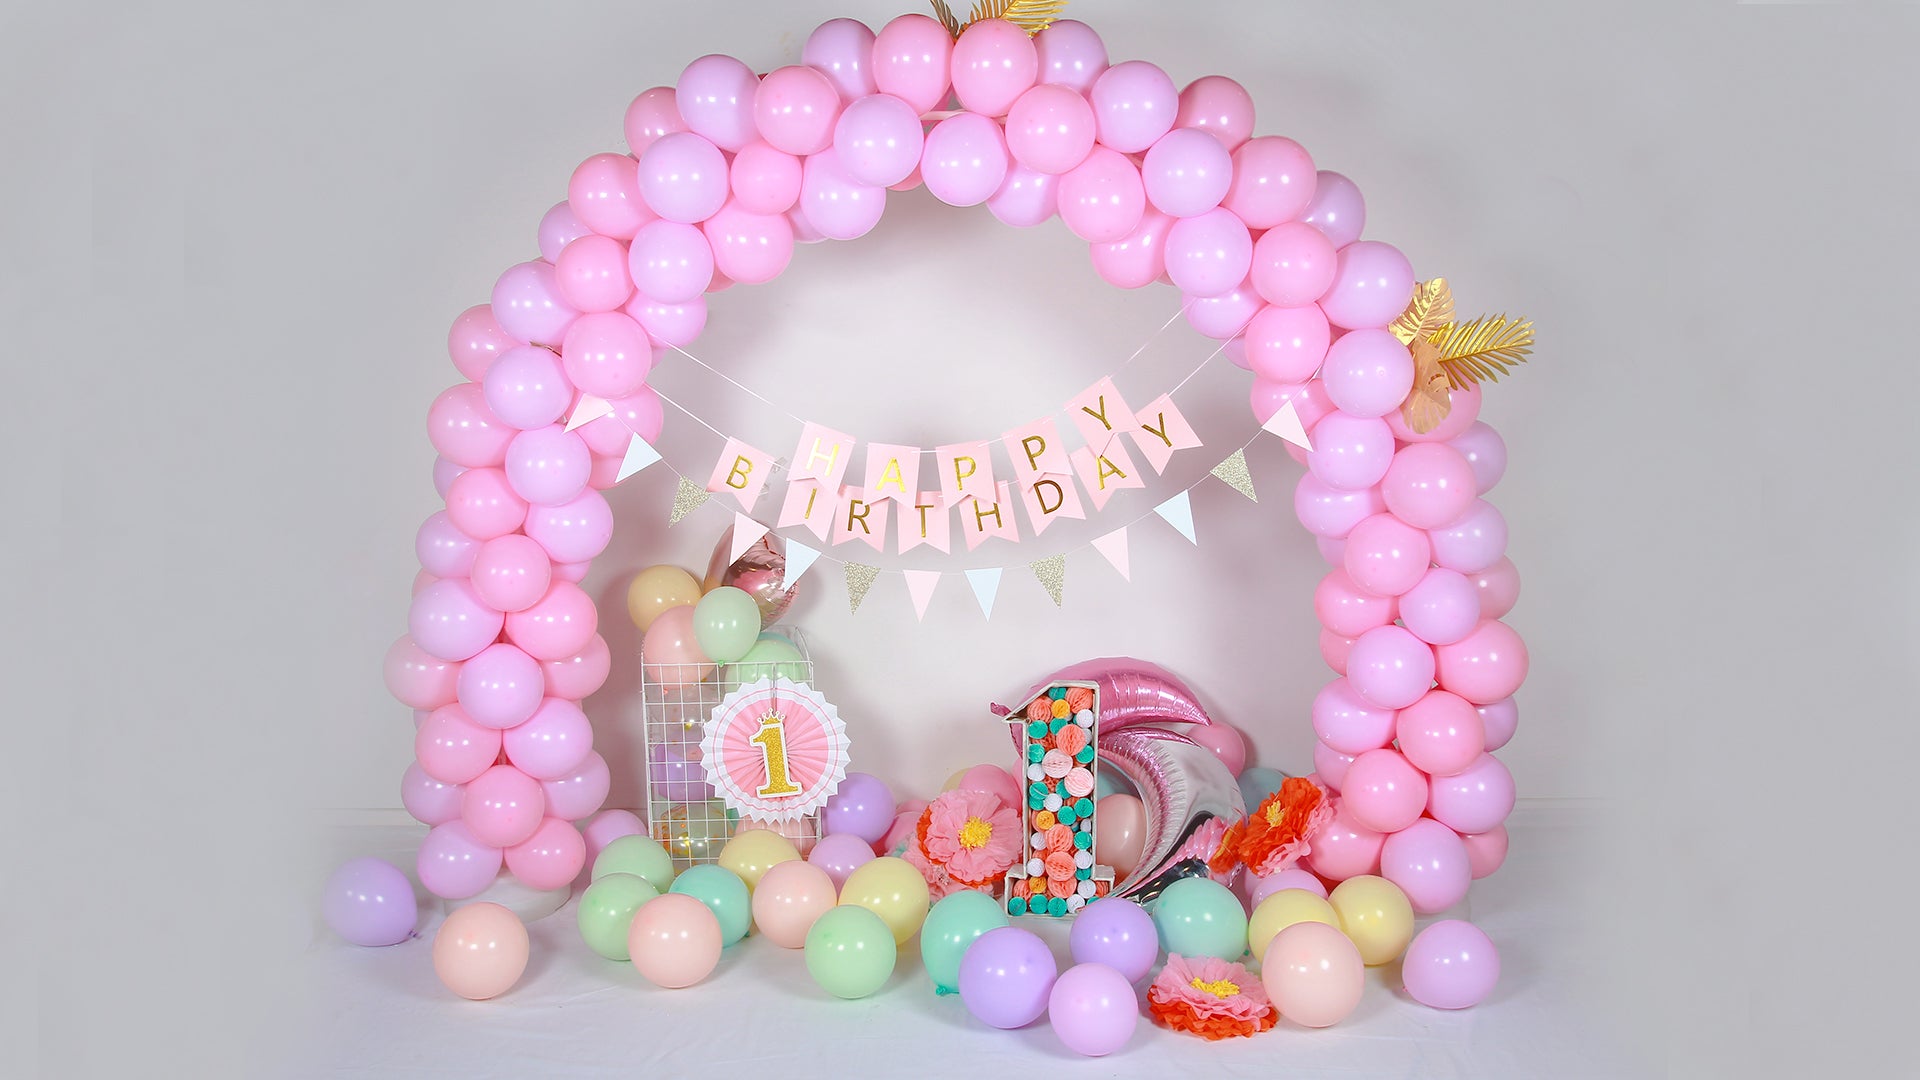 How to make a Birthday Pompom number stand?